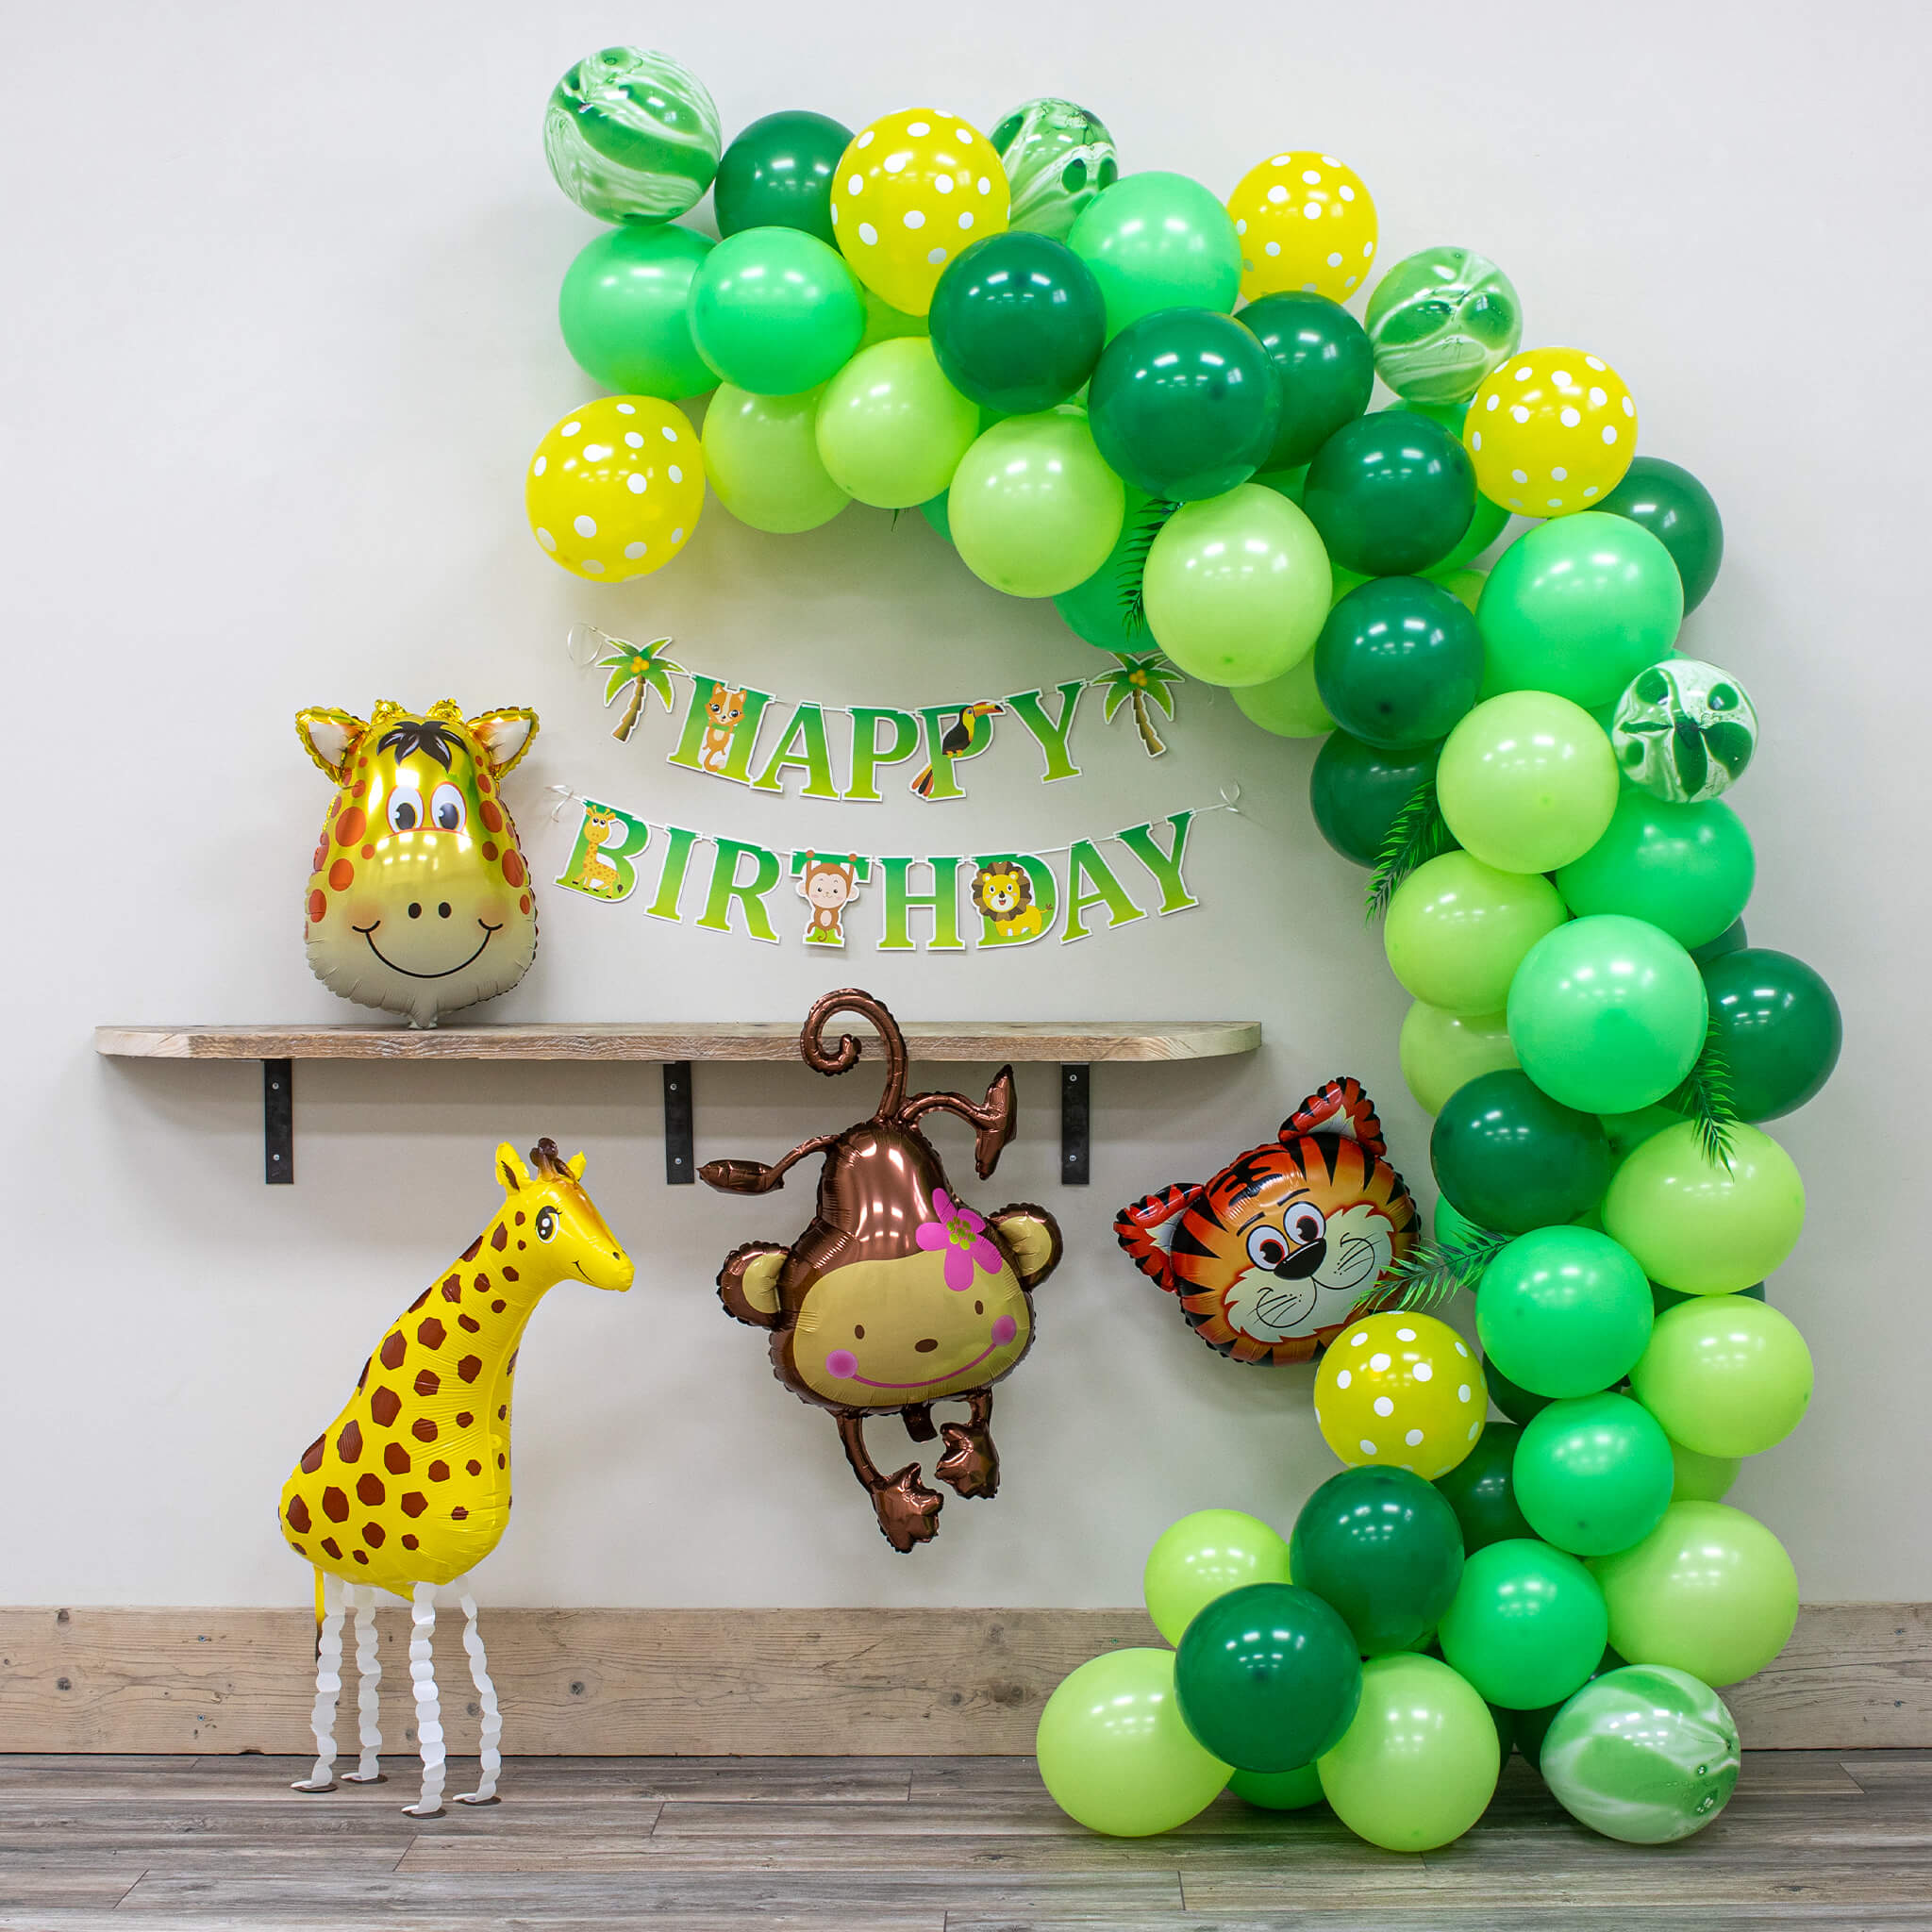 Jungle Themed Birthday Balloon Arch Decoration DIY Kit - Includes 75+ Balloons